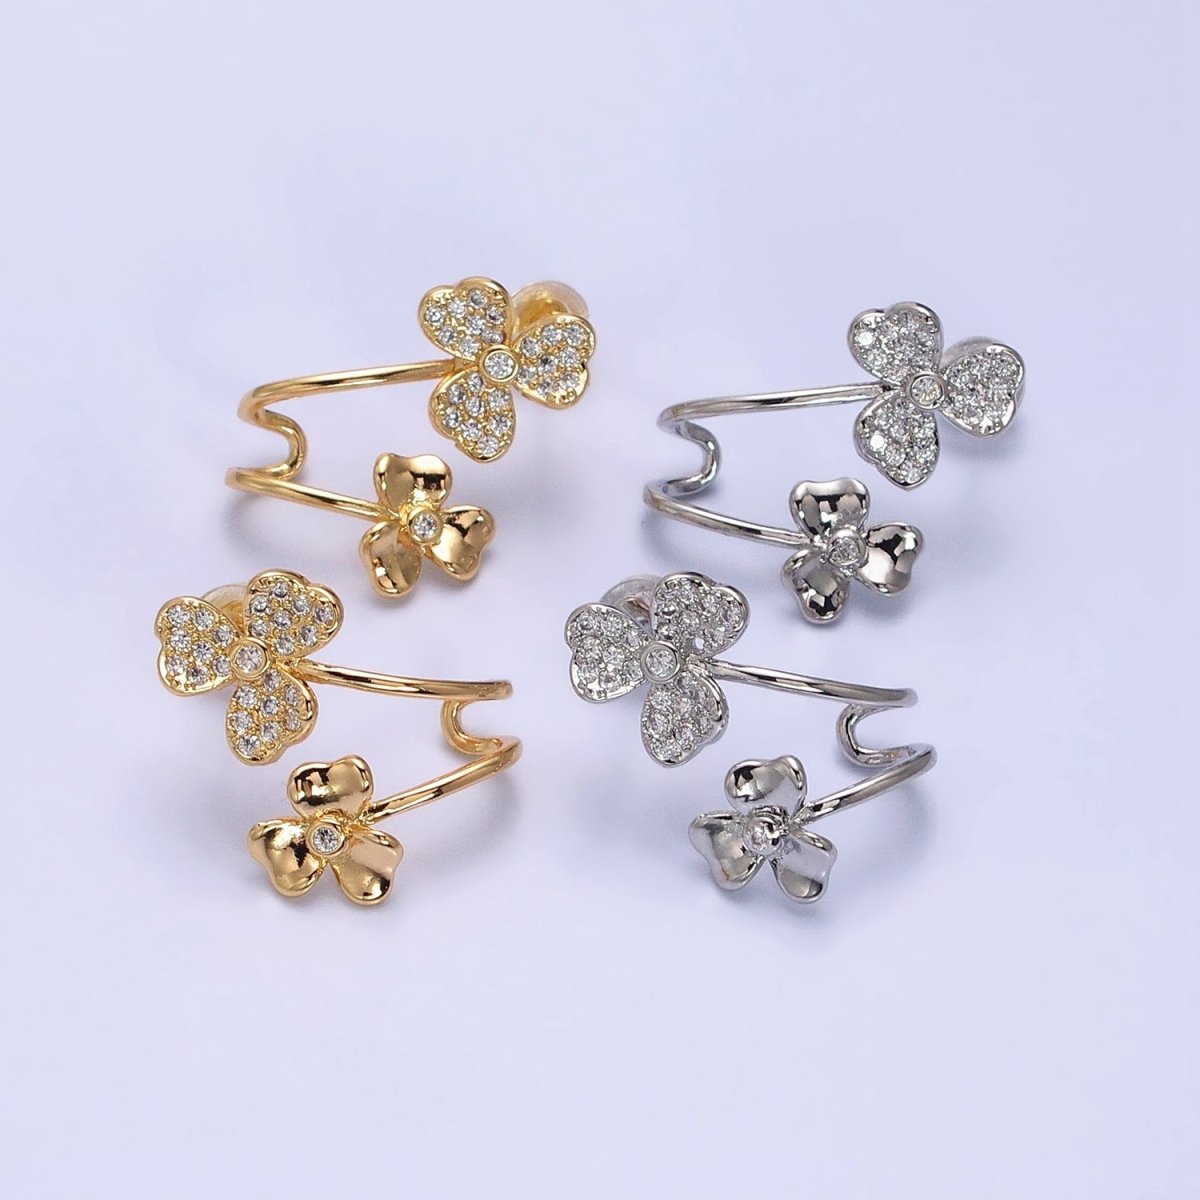 Gold, Silver Double Flower Micro Paved CZ Ear Cuff Stud Earrings | AB574 AB575 - DLUXCA